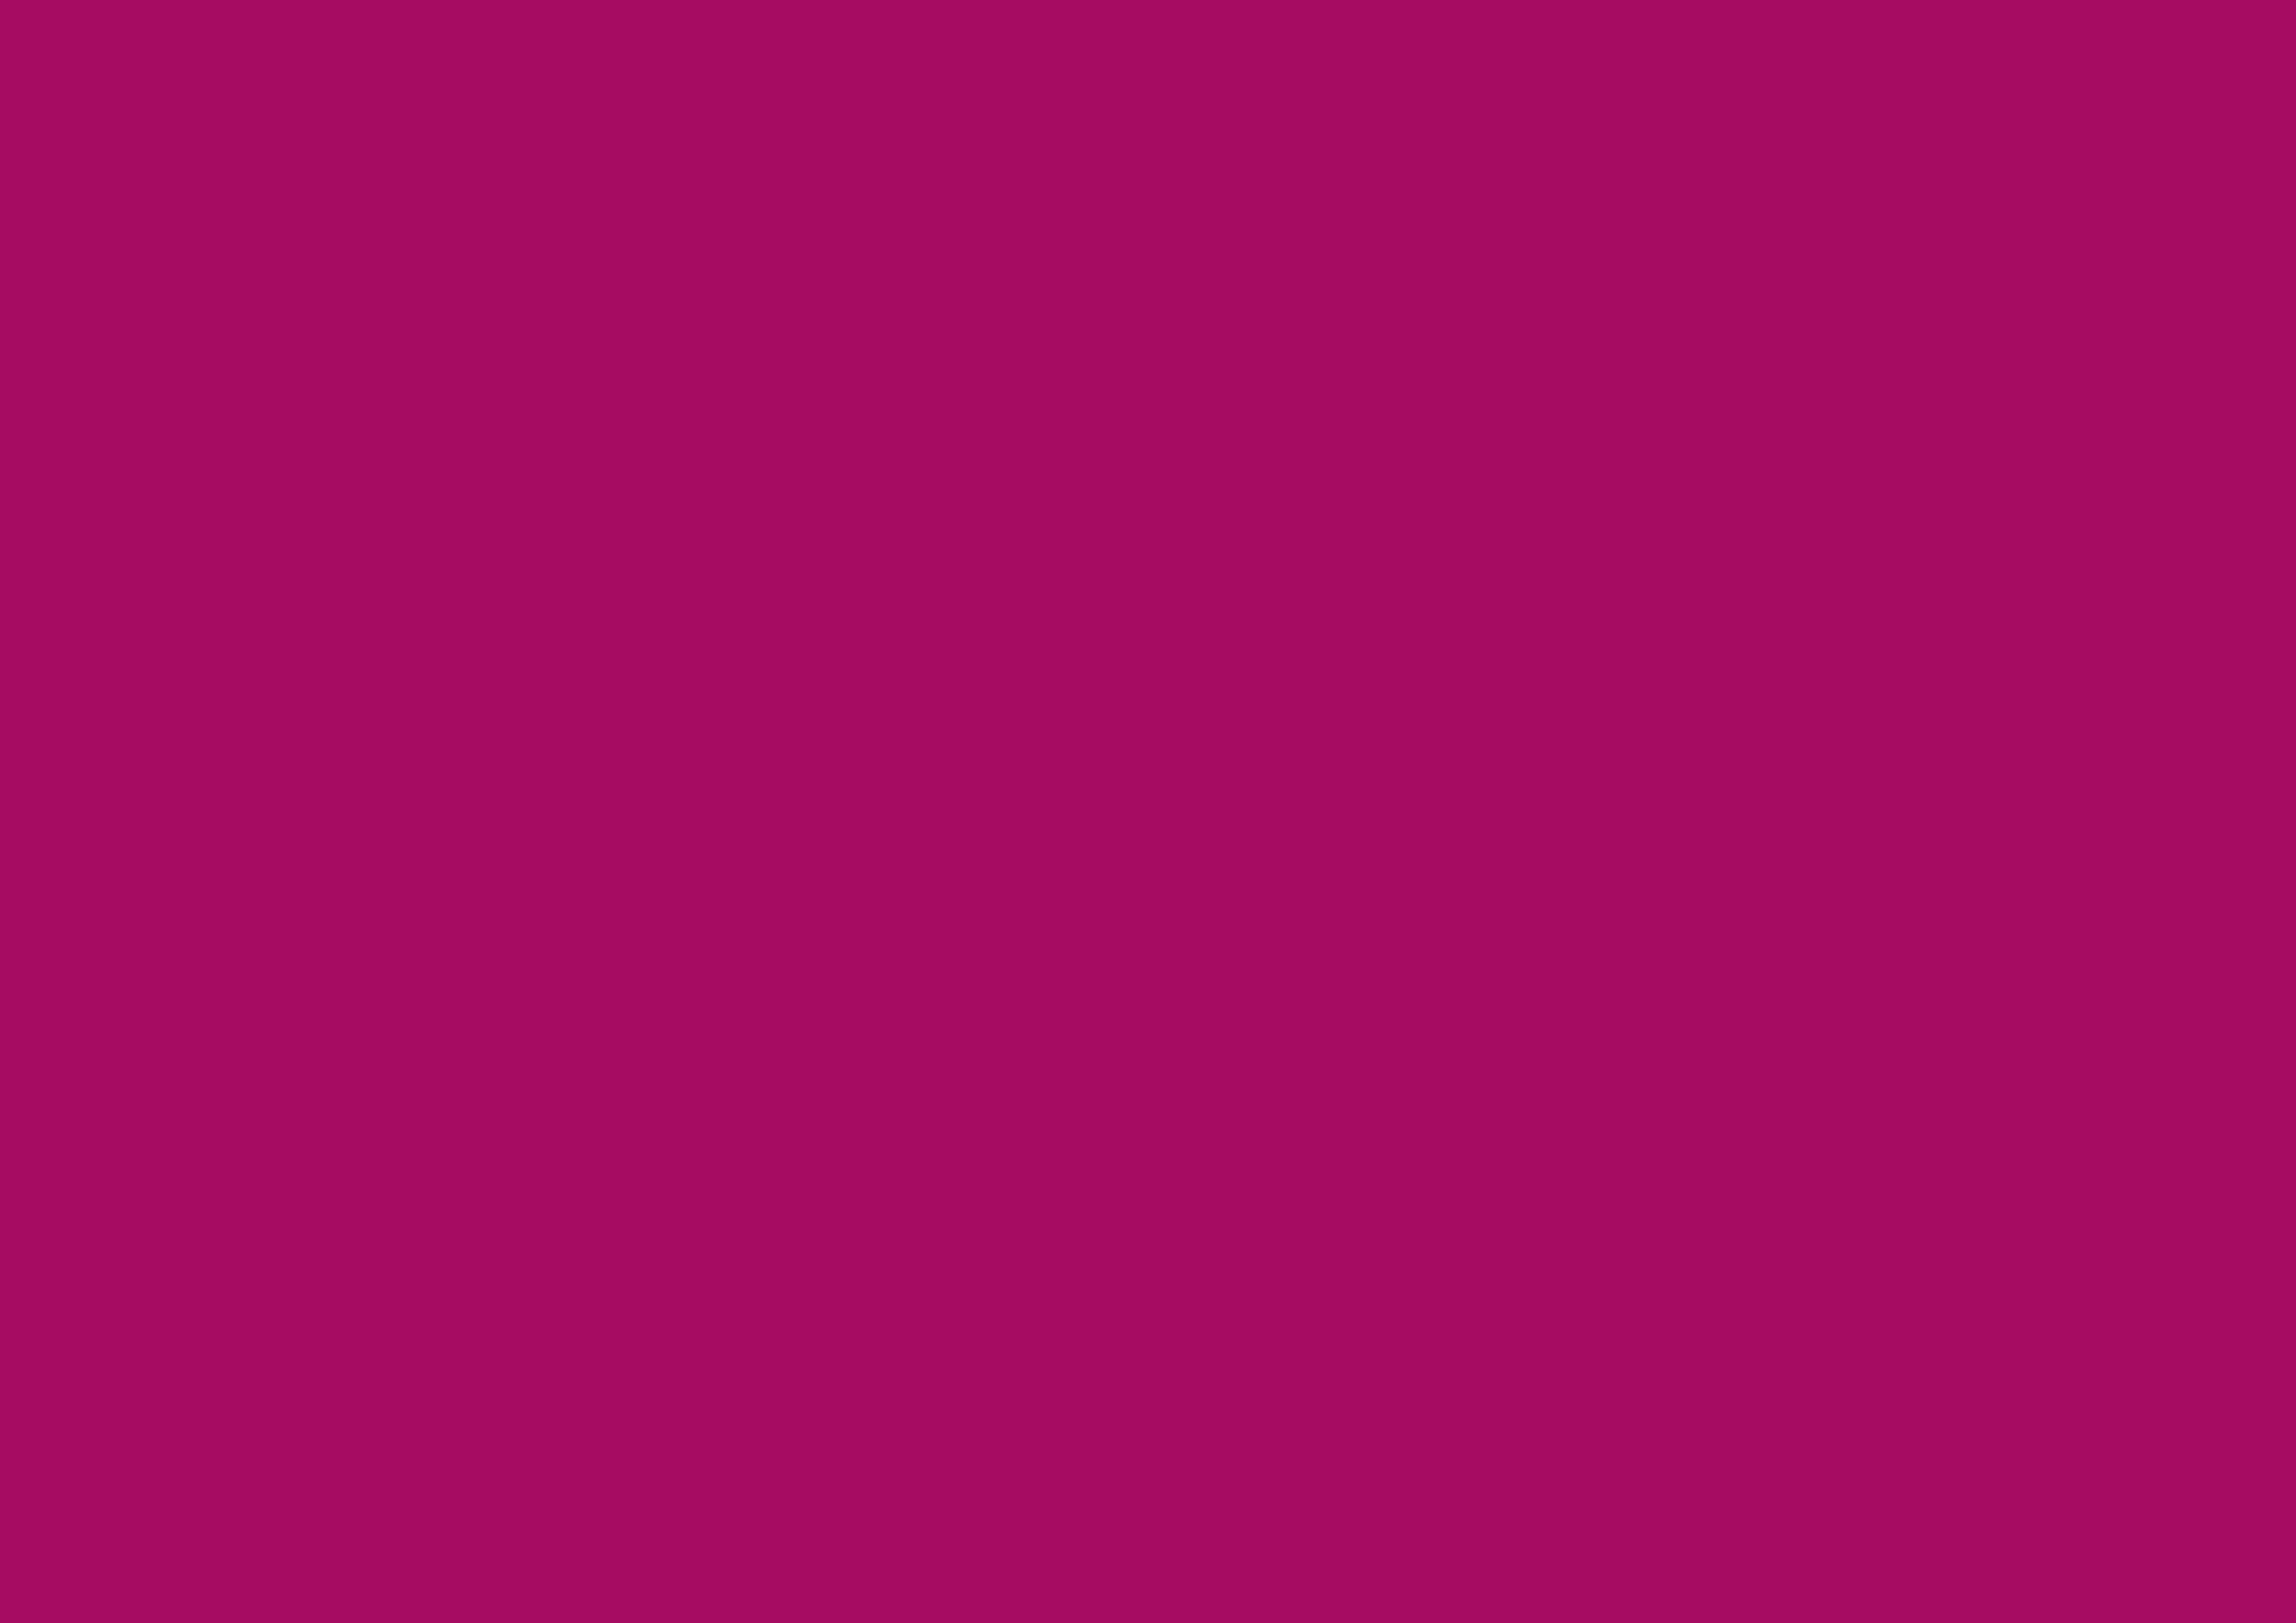 3508x2480 Jazzberry Jam Solid Color Background